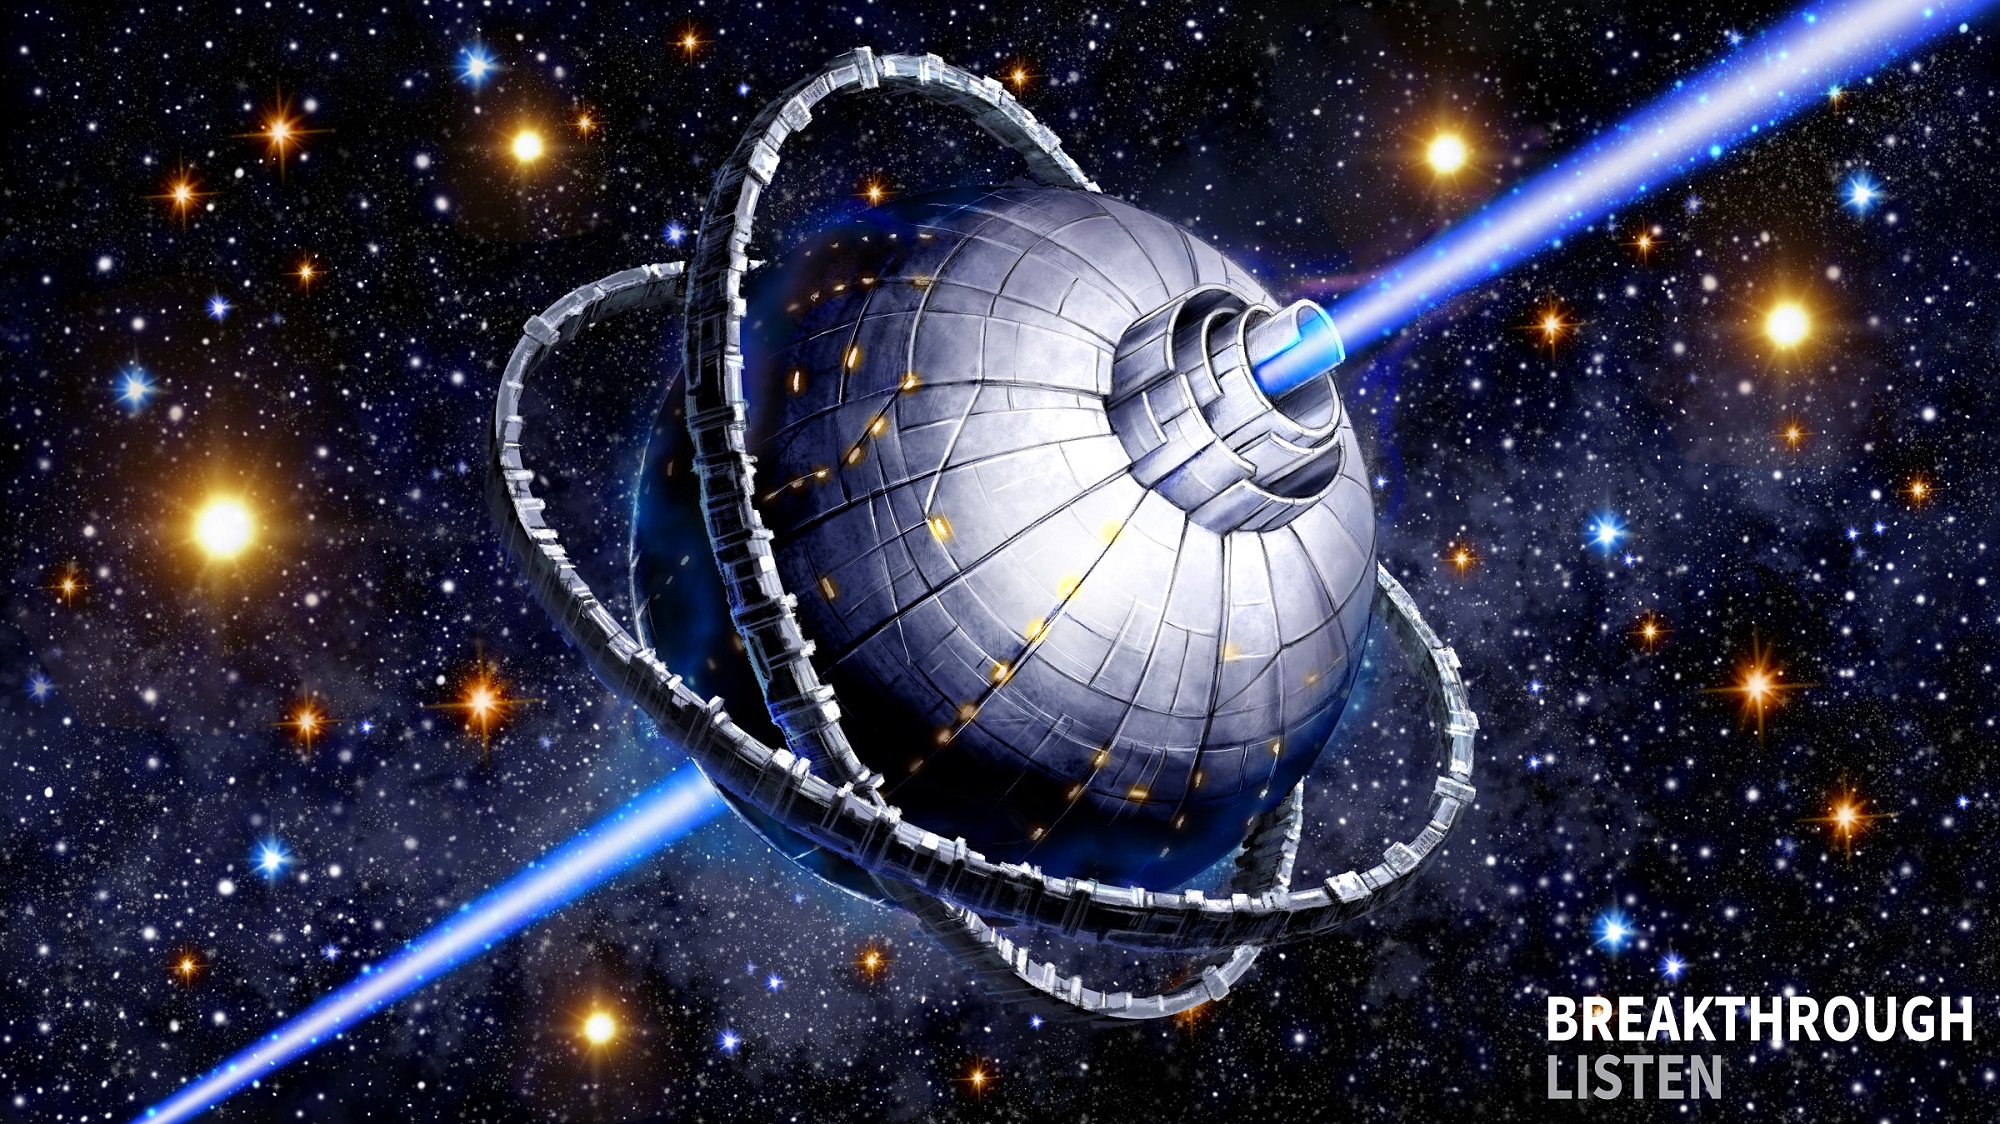 Artist's impression of a Dyson Sphere, an proposed alien megastructure that is the target of SETI surveys. Finding one of these qualifies in a "first contact" scenario. Credit: Breakthrough Listen / Danielle Futselaar